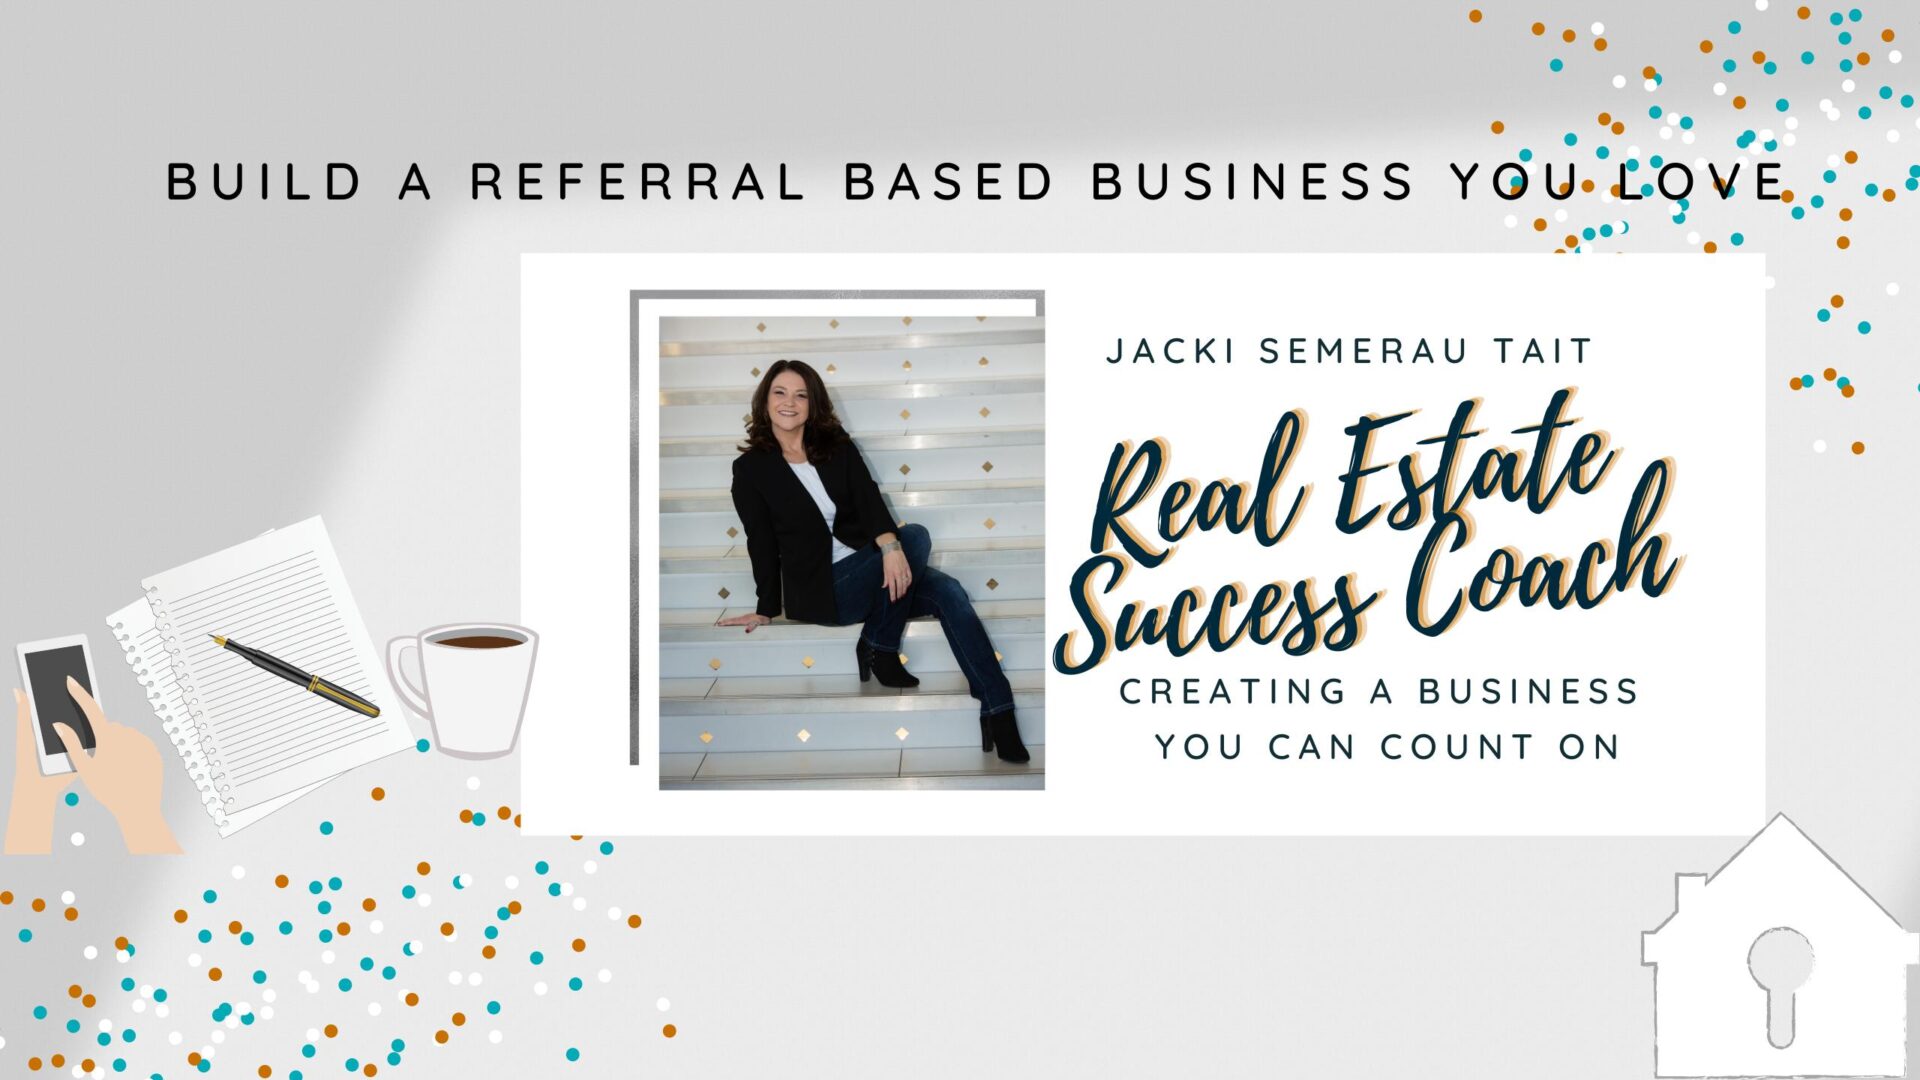 A referral based business you can count on